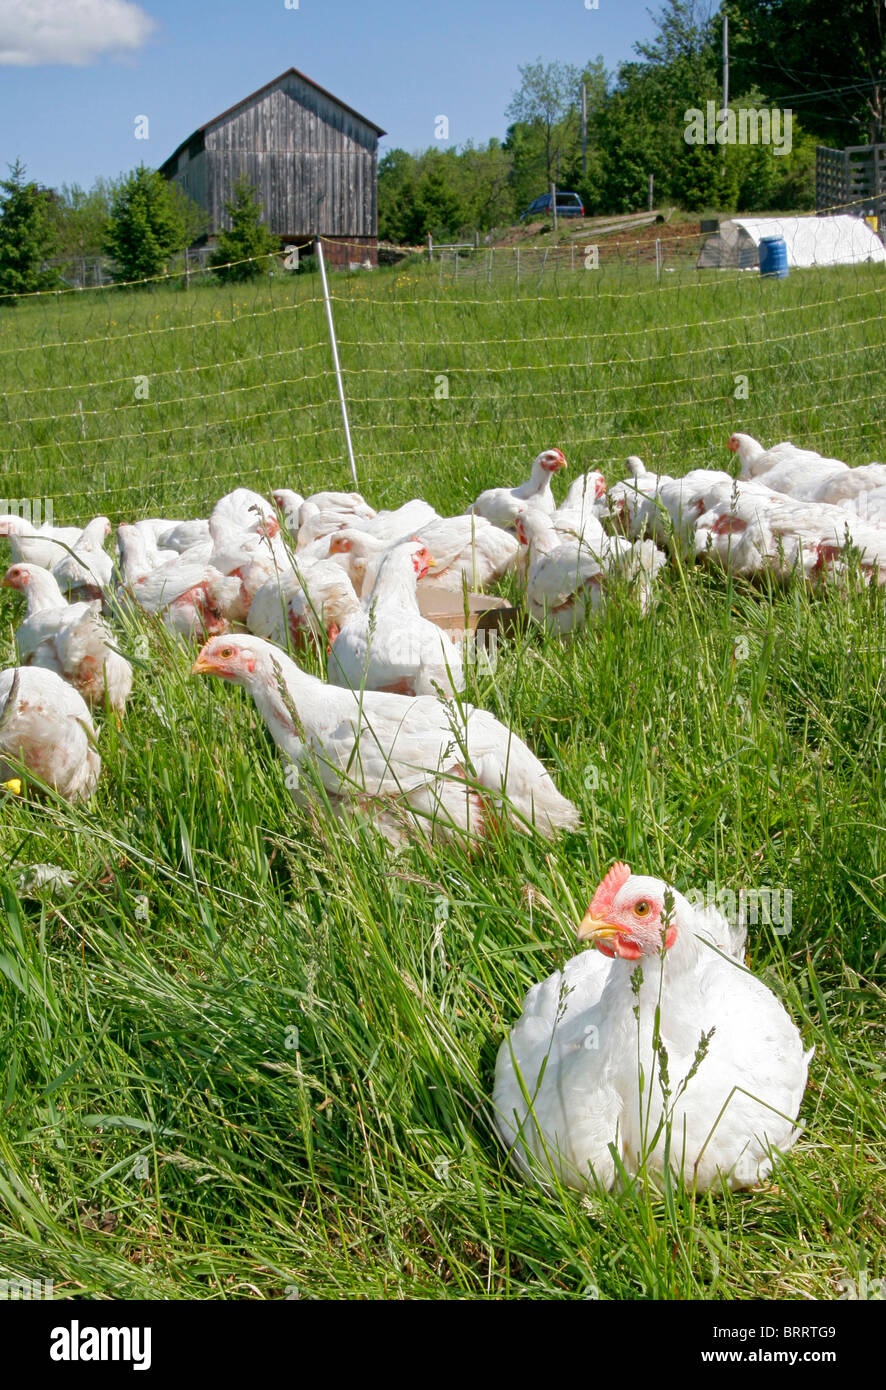 a flock of white farm chickens outside near the barn Stock Photo